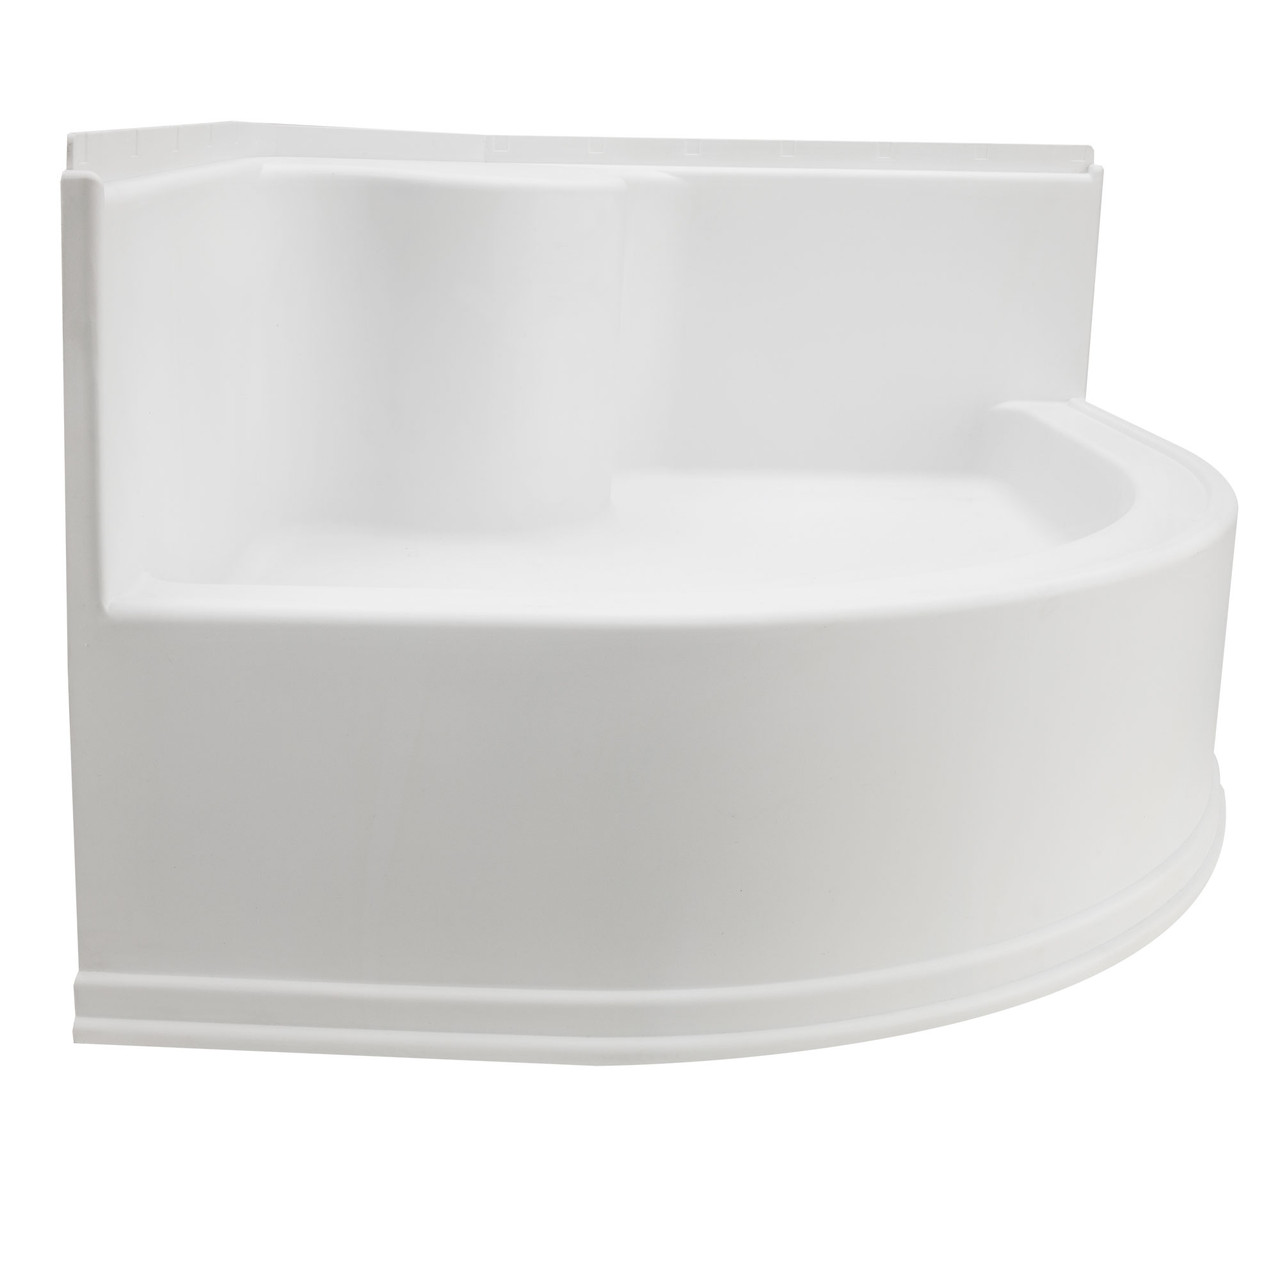 RV Shower Pan 32 x 24 x 5 Right Drain in White - RecPro